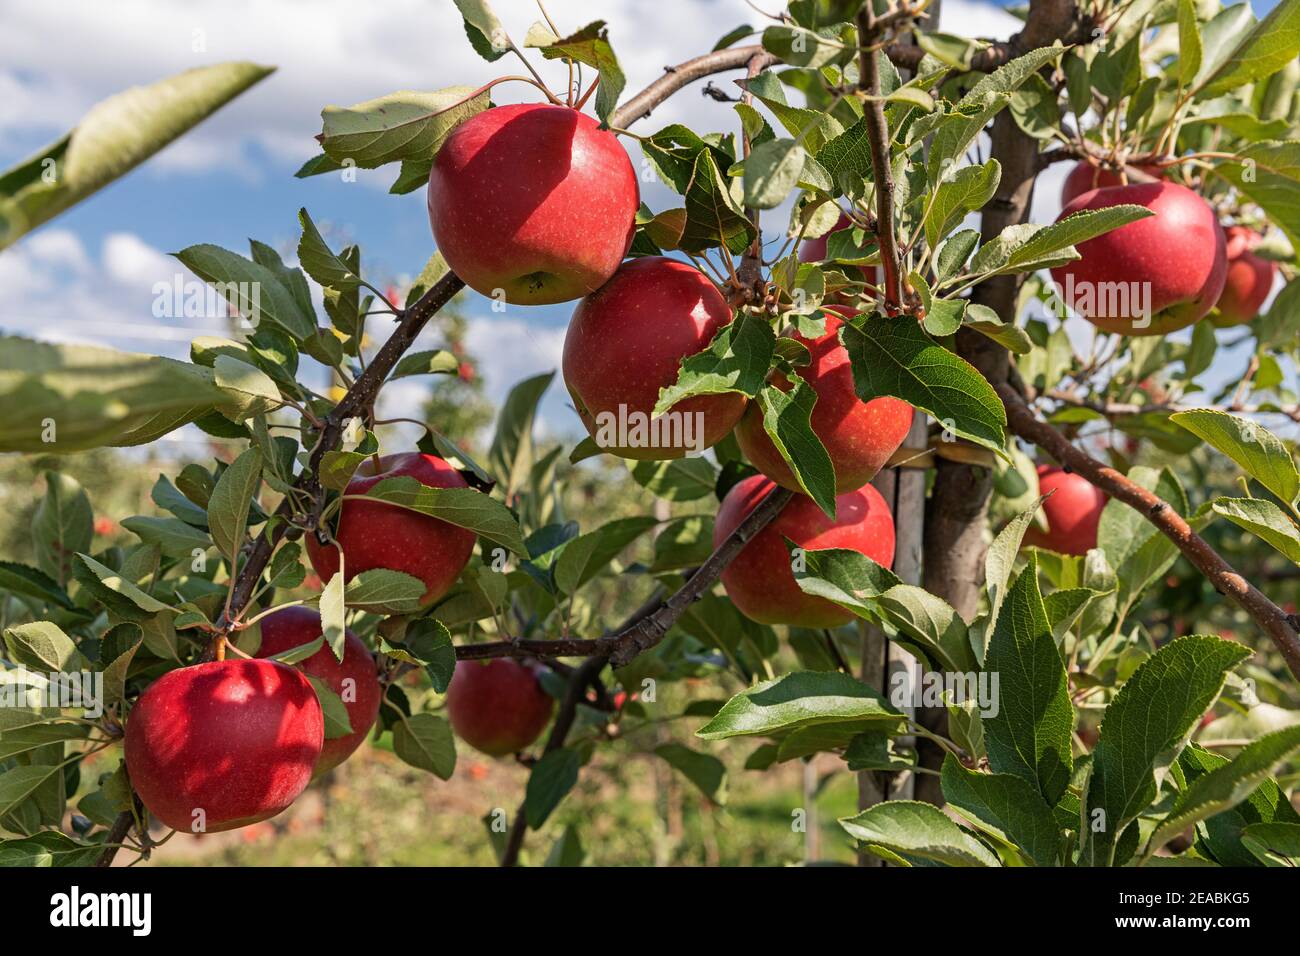 Apple tree, red apples, close, at Borstel, Altes Land, Stade district, Lower Saxony, Stock Photo